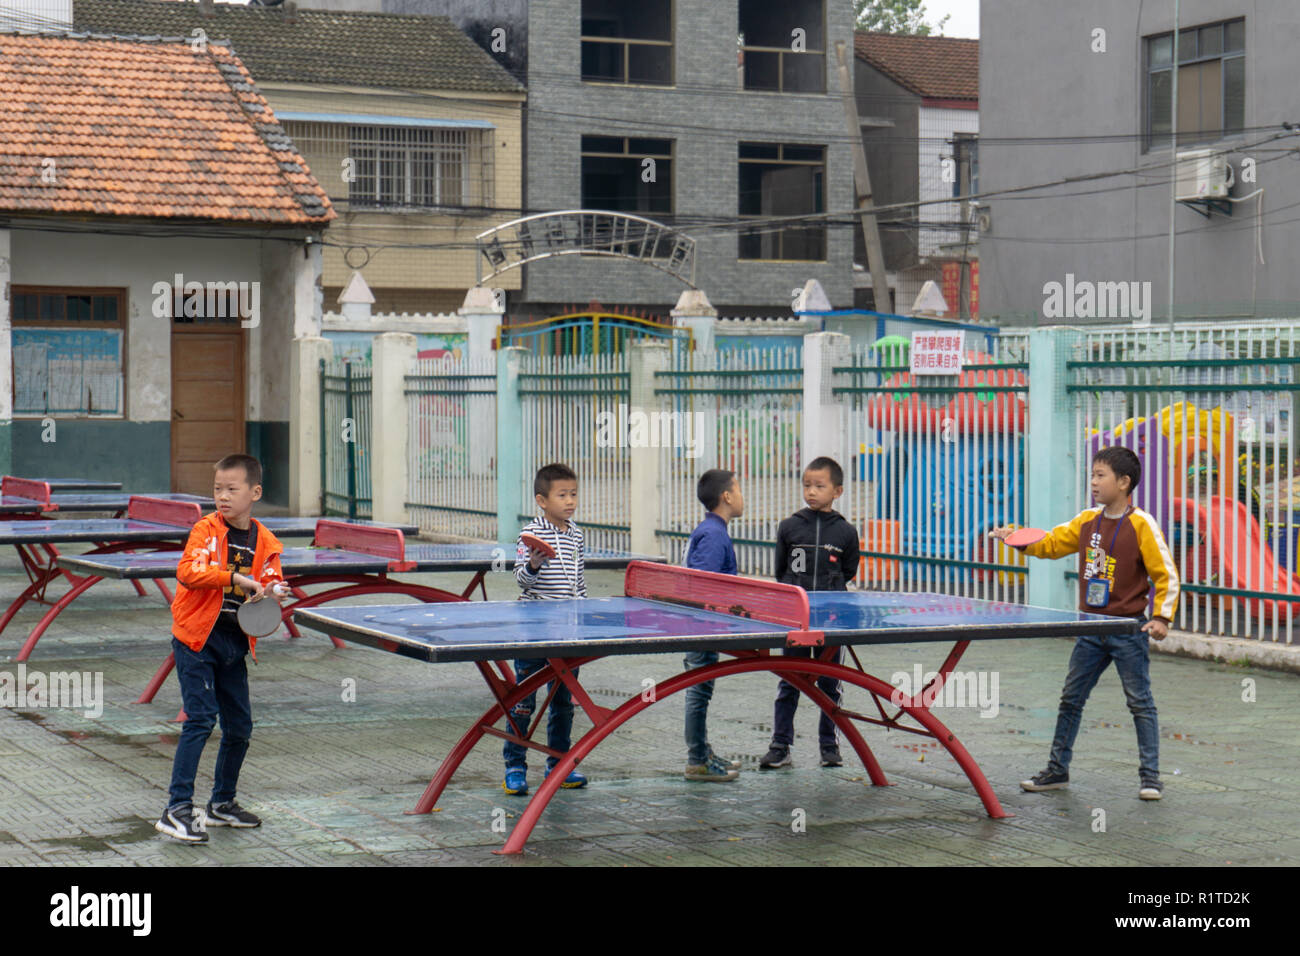 Children in China playing table tennis at primary school Stock Photo